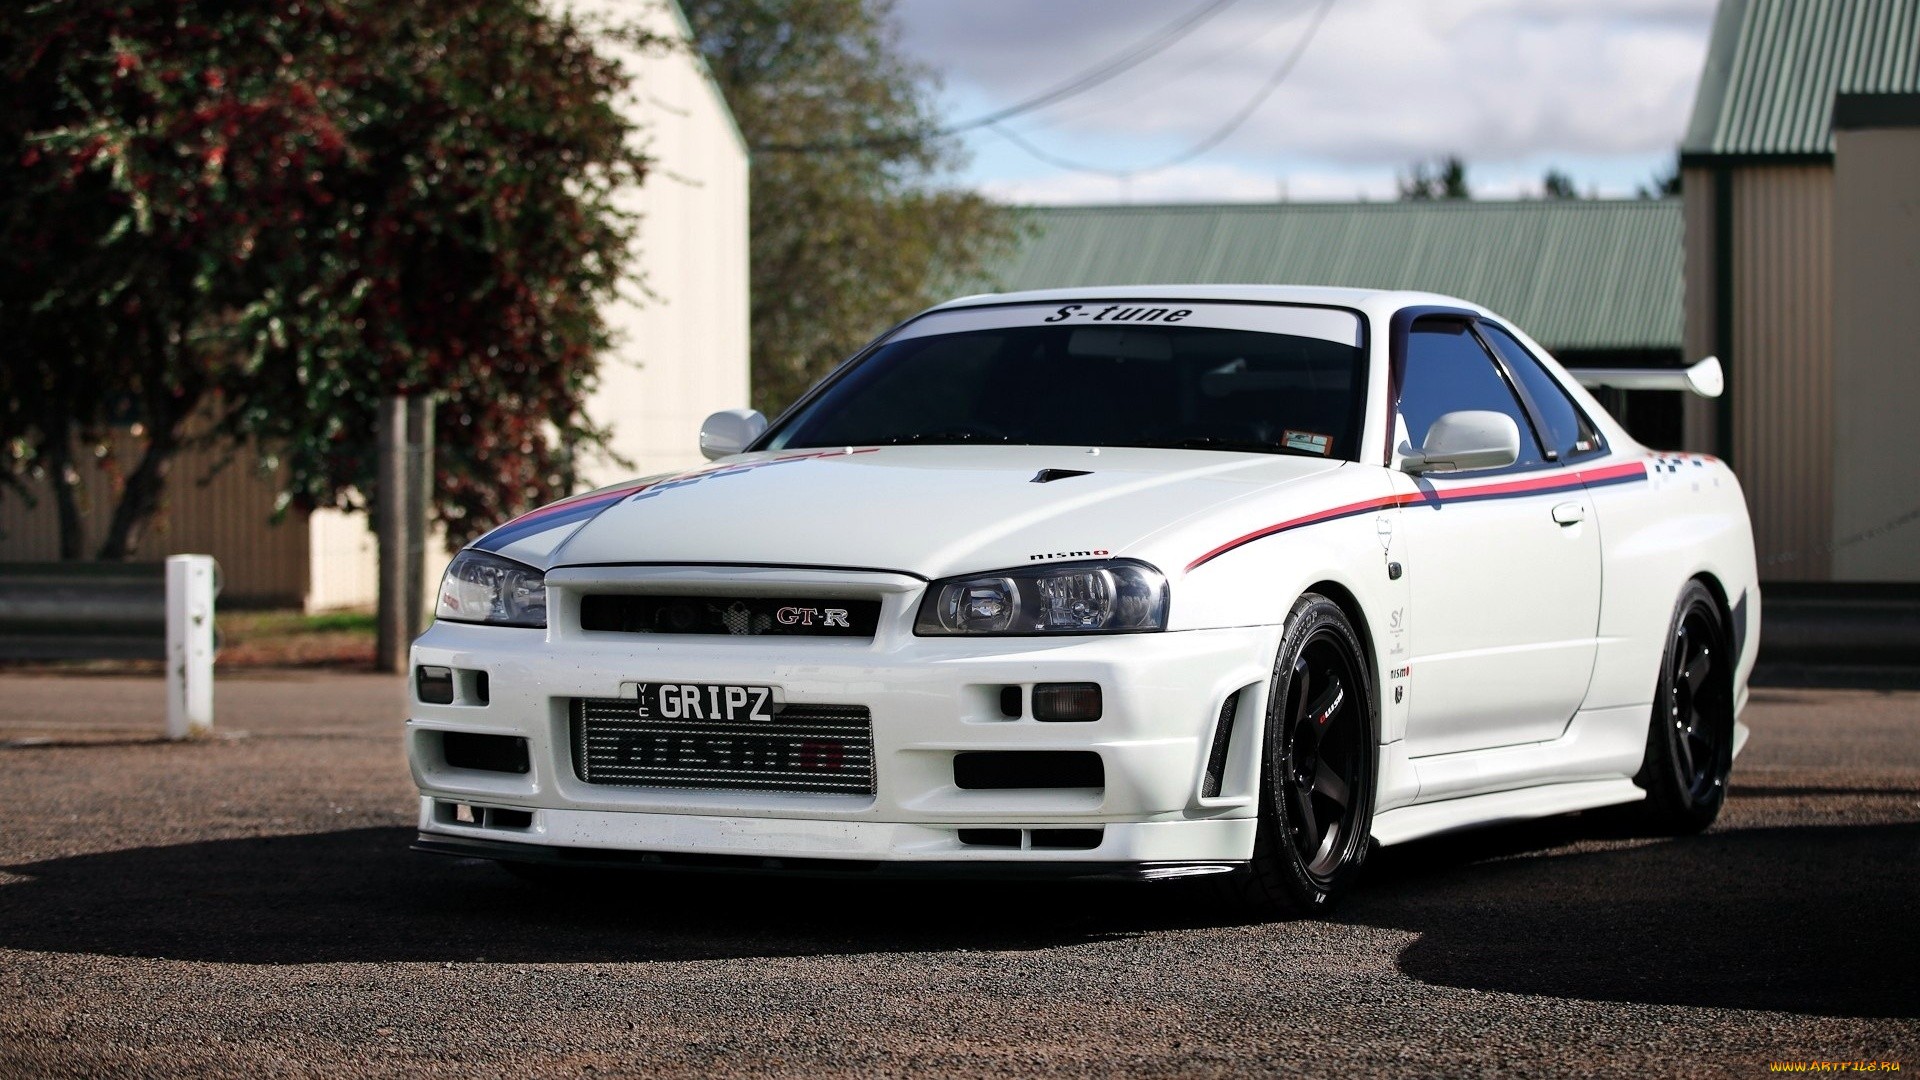 Nissan Skyline R34 Supercar Tuning White Wallpapers Hd Desktop And Mobile Backgrounds